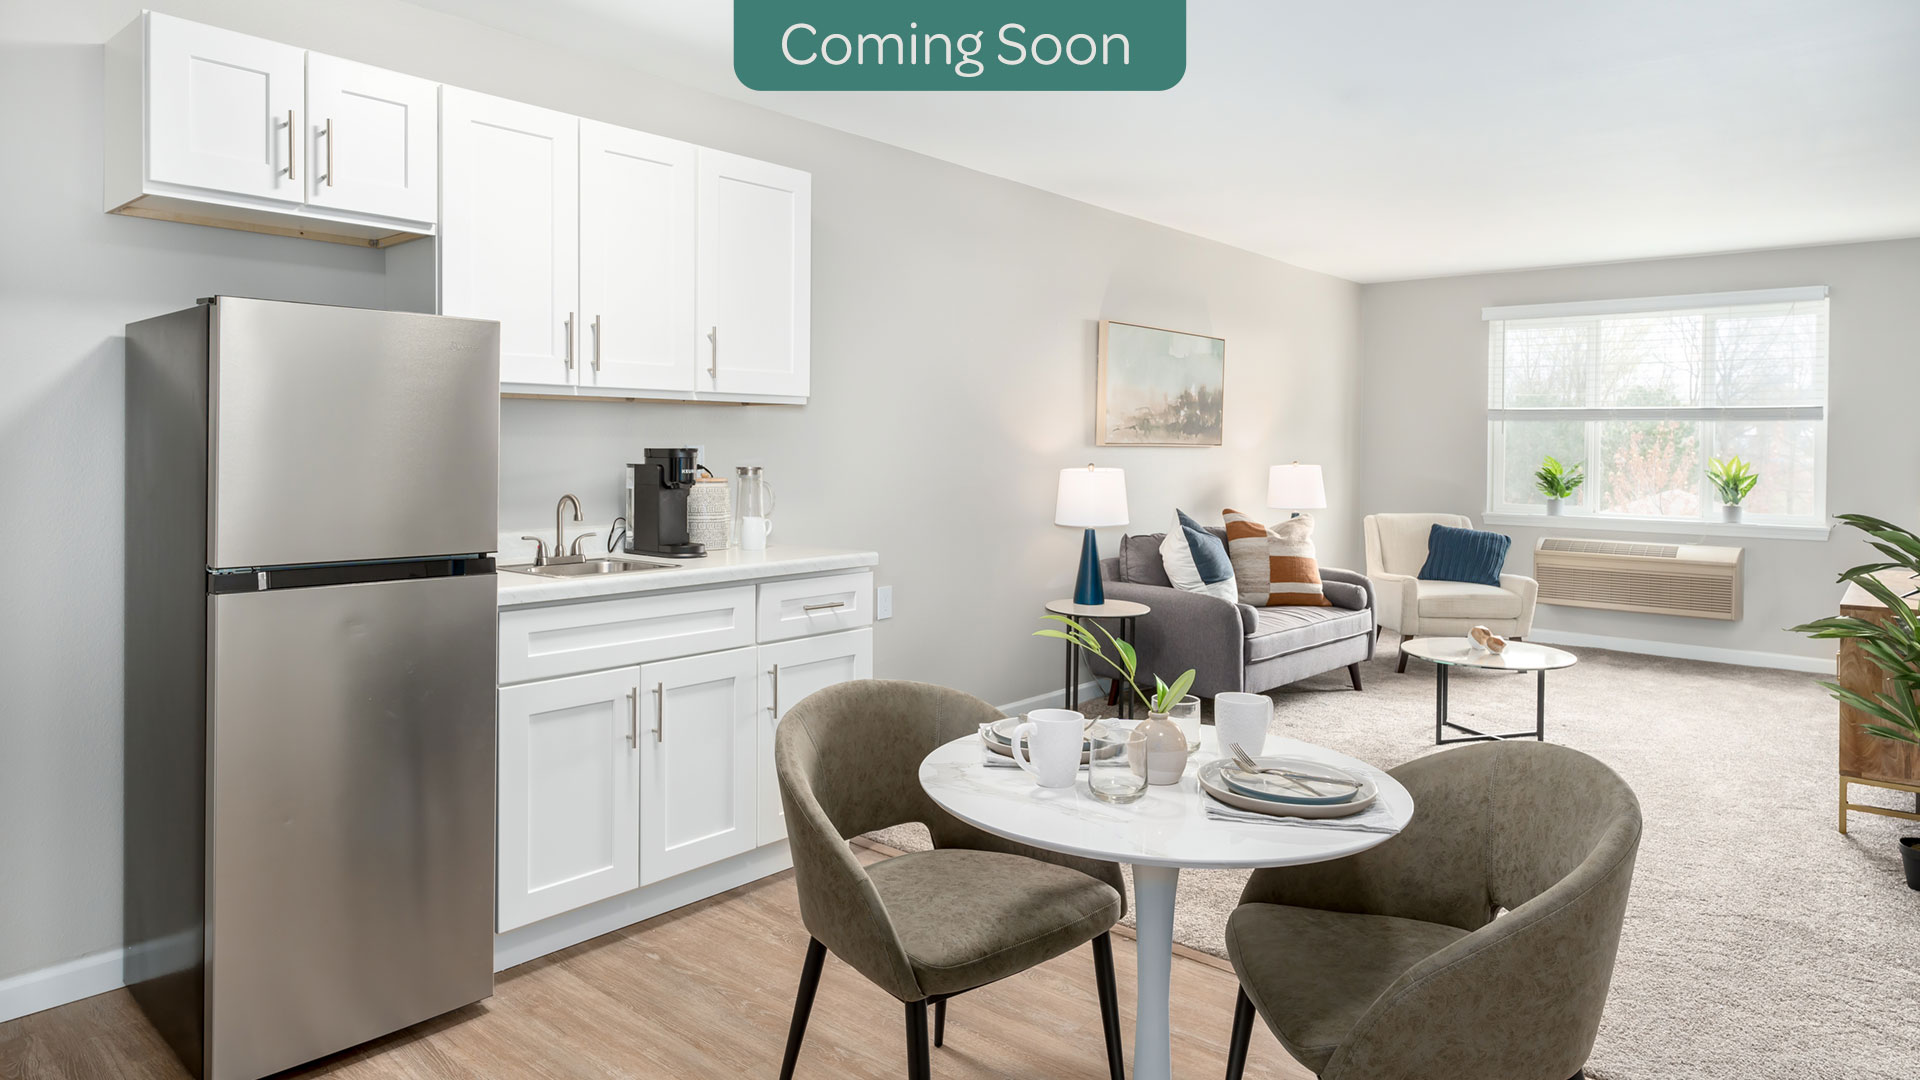 apartment kitchenette coming soon